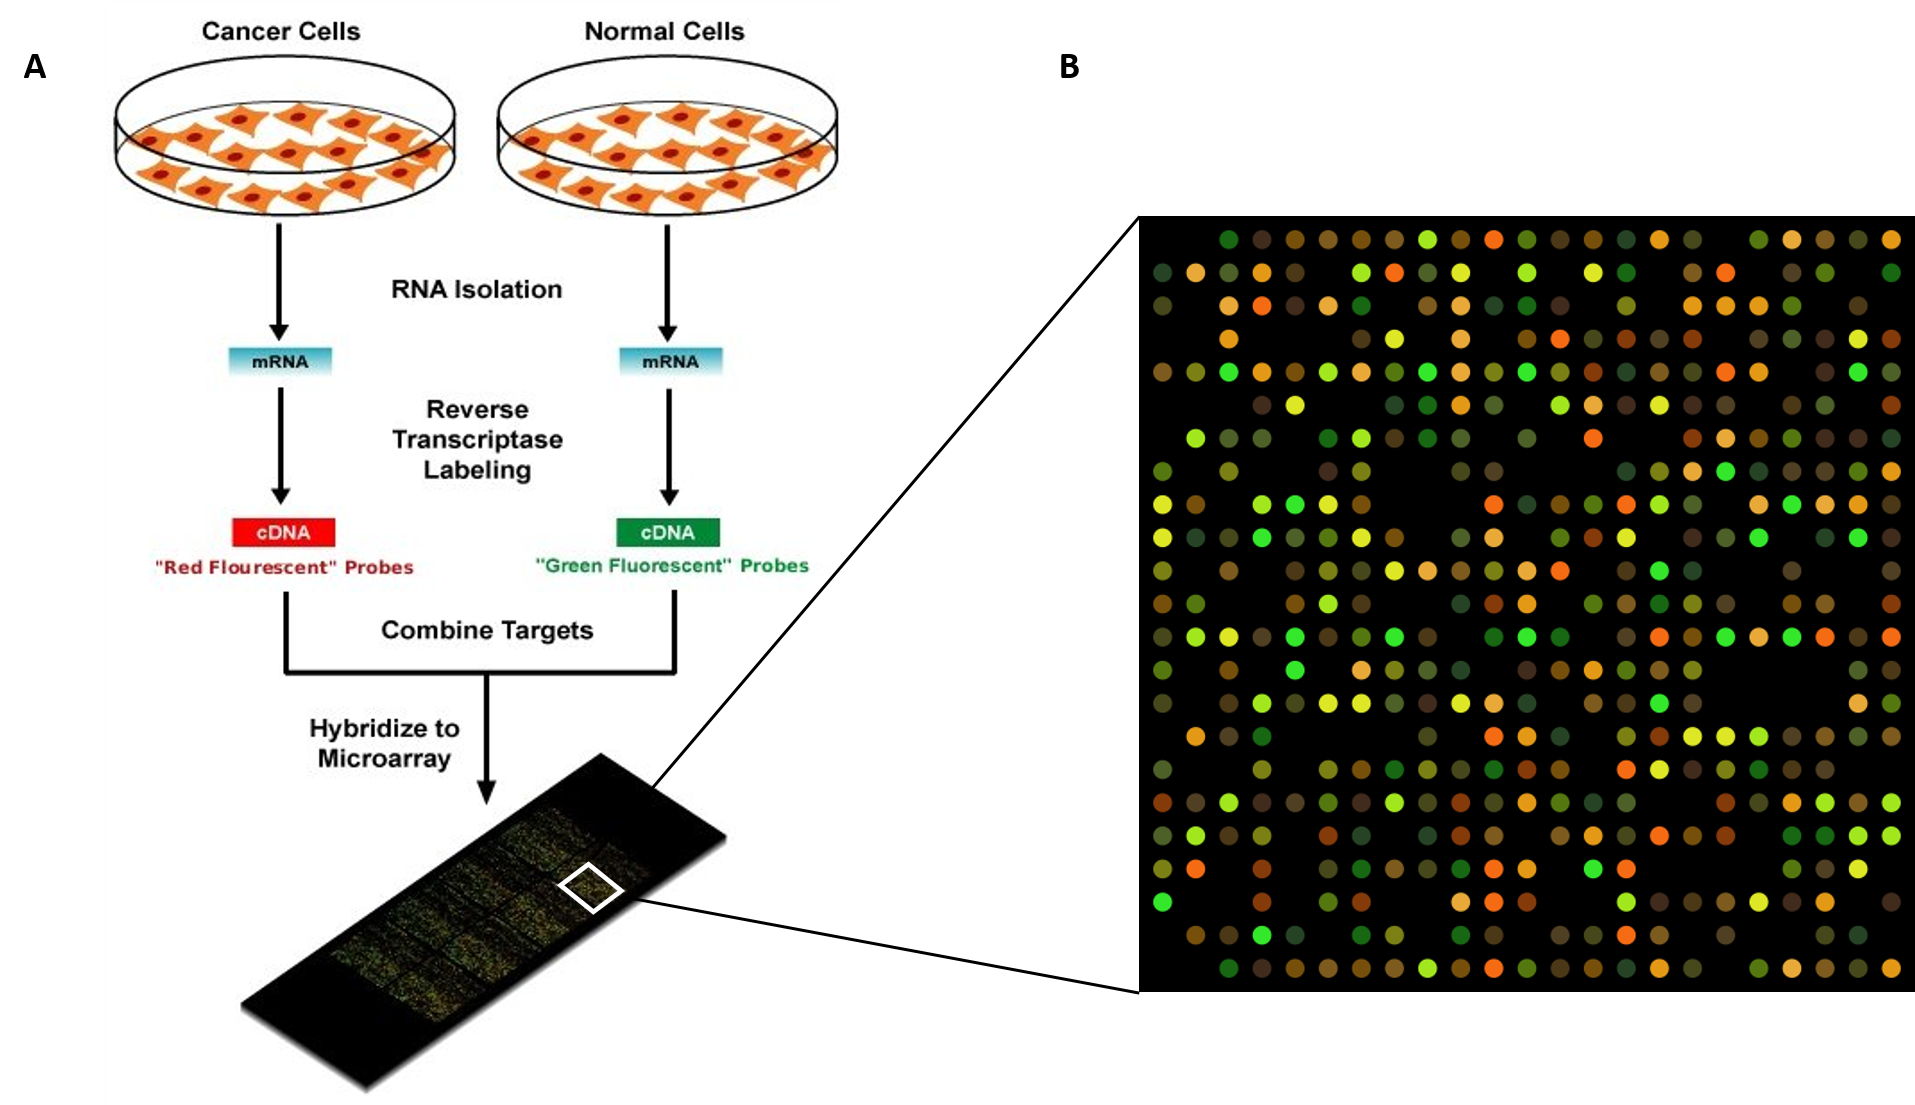 microarray probe to gene r expression taply